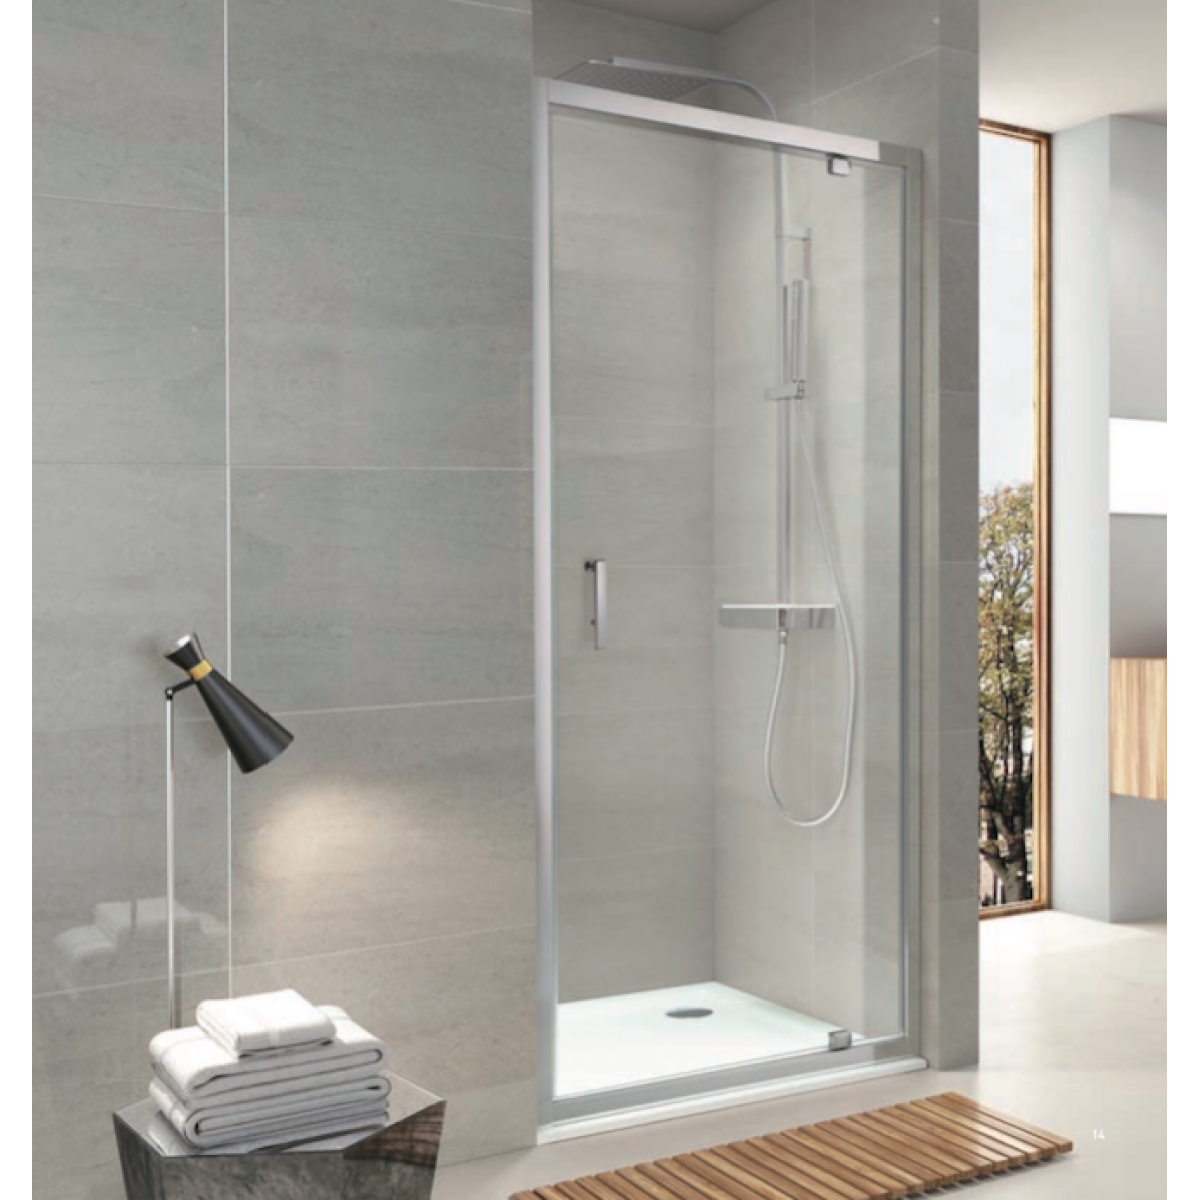 https://www.lennoxbathroom.co.nz/akl/image/cache/catalog/Products/shower_box/3_side_showrbox/HGMsingle%20door-1200x1200-1200x1200.png